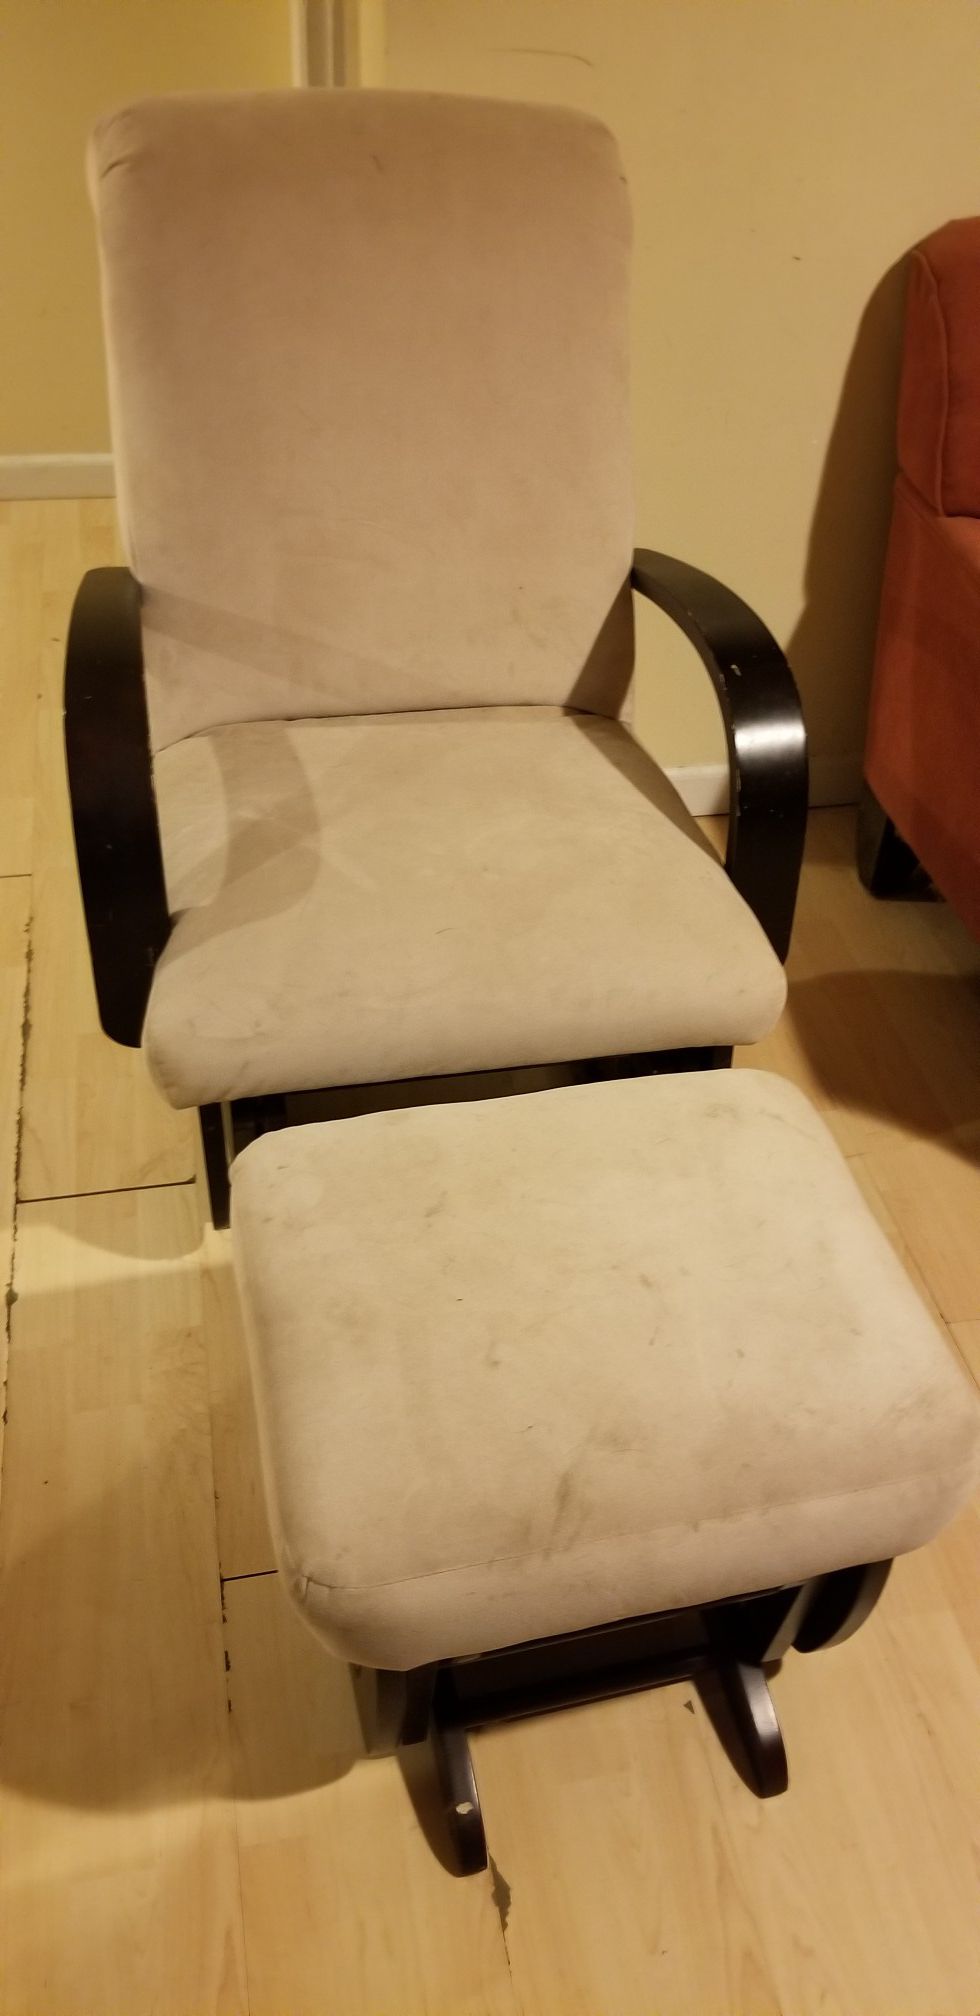 Rocking chair with ottoman set